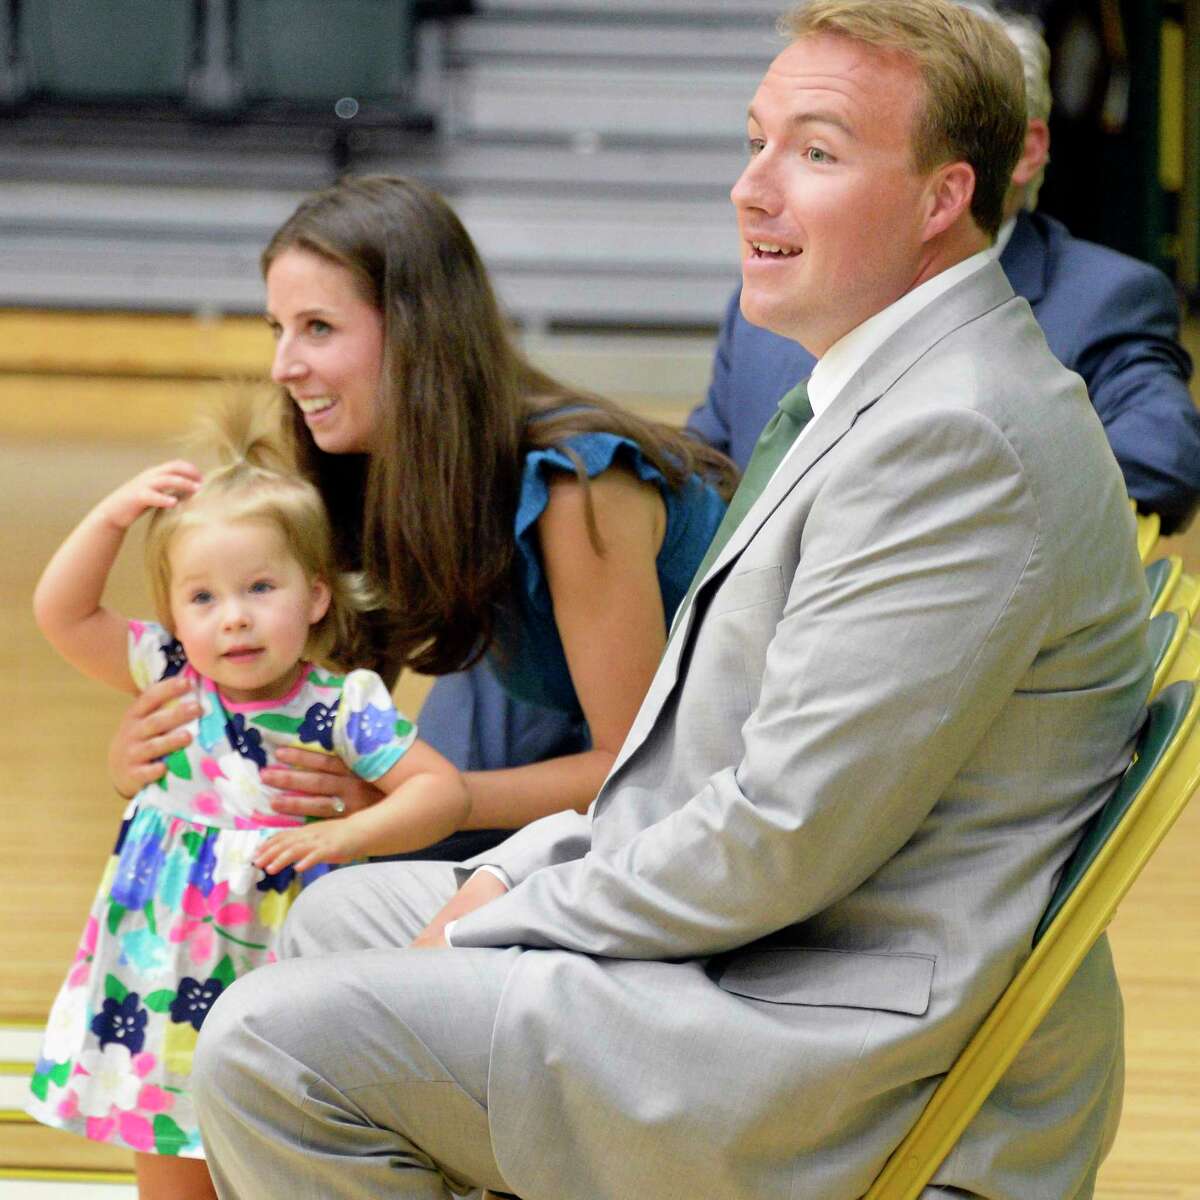 New Siena men?•s lacrosse coach, Liam Gleason with wife Jaclyn and daughter Kennedy, 2, during a news conference Thursday June 28, 2018 in Colonie, NY. (John Carl D'Annibale/Times Union)